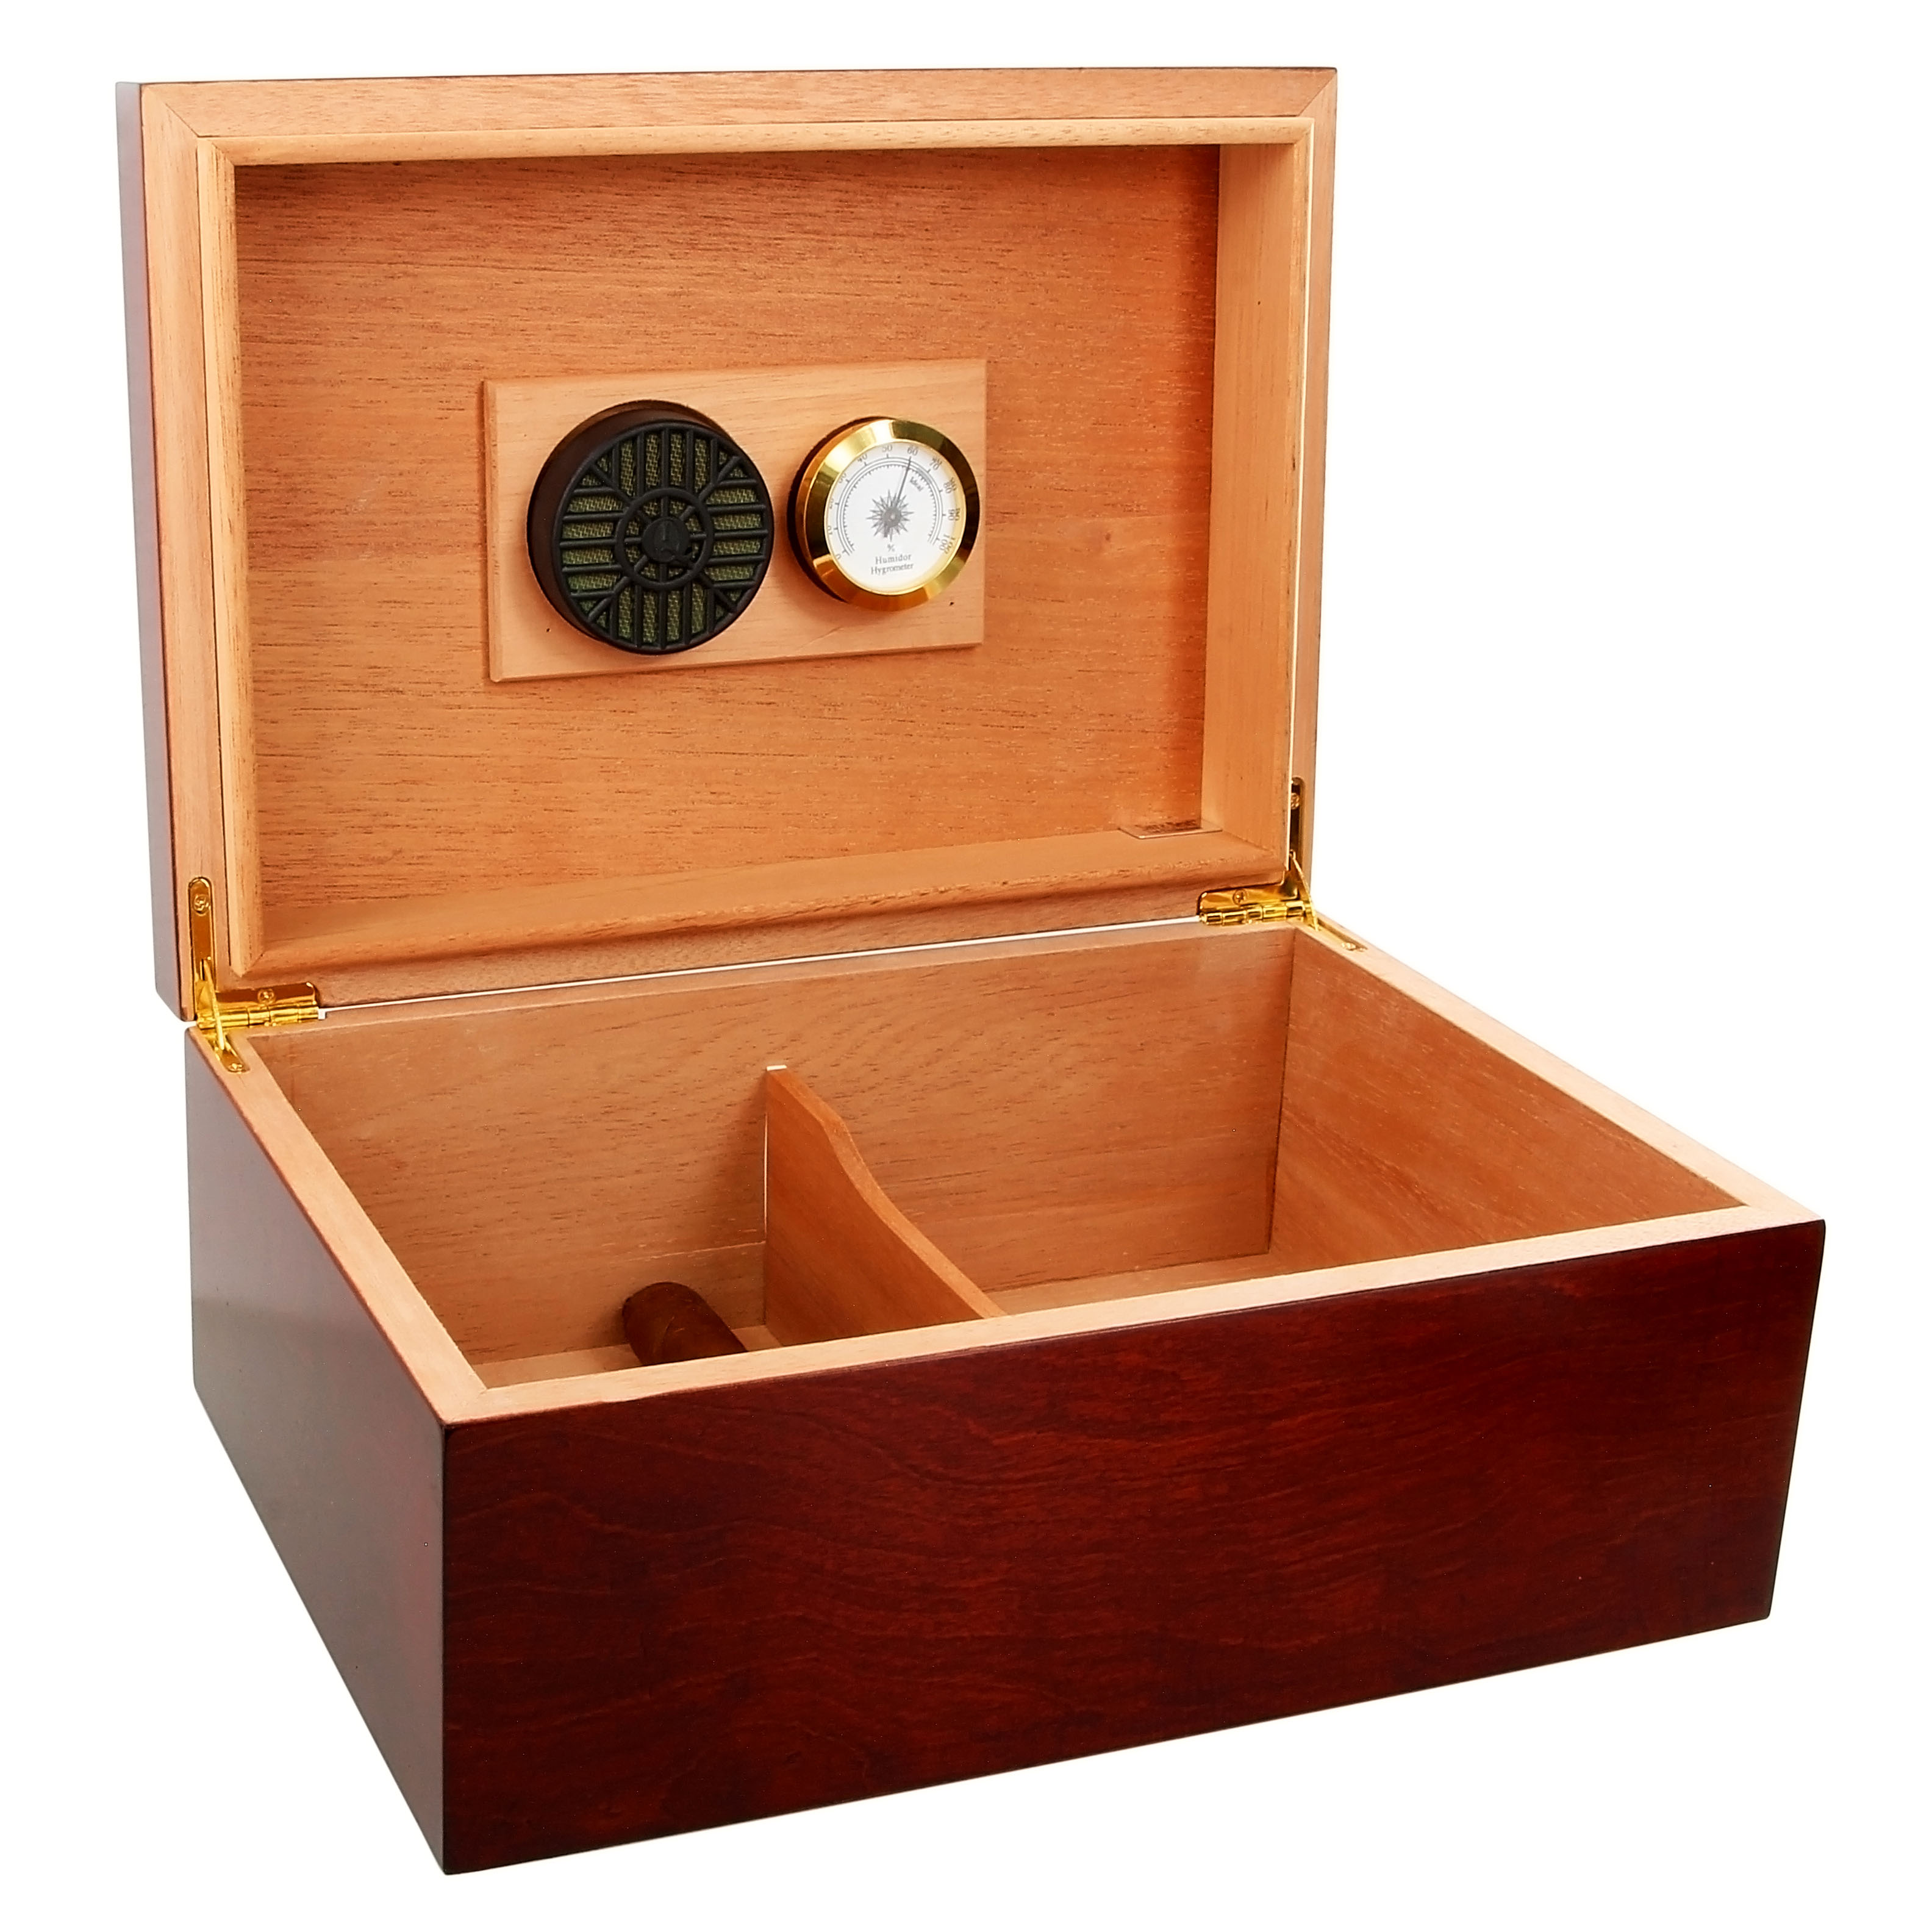 Cigar Humidifiers and Hygrometers by Boveda, Diamond Crown, XIKAR